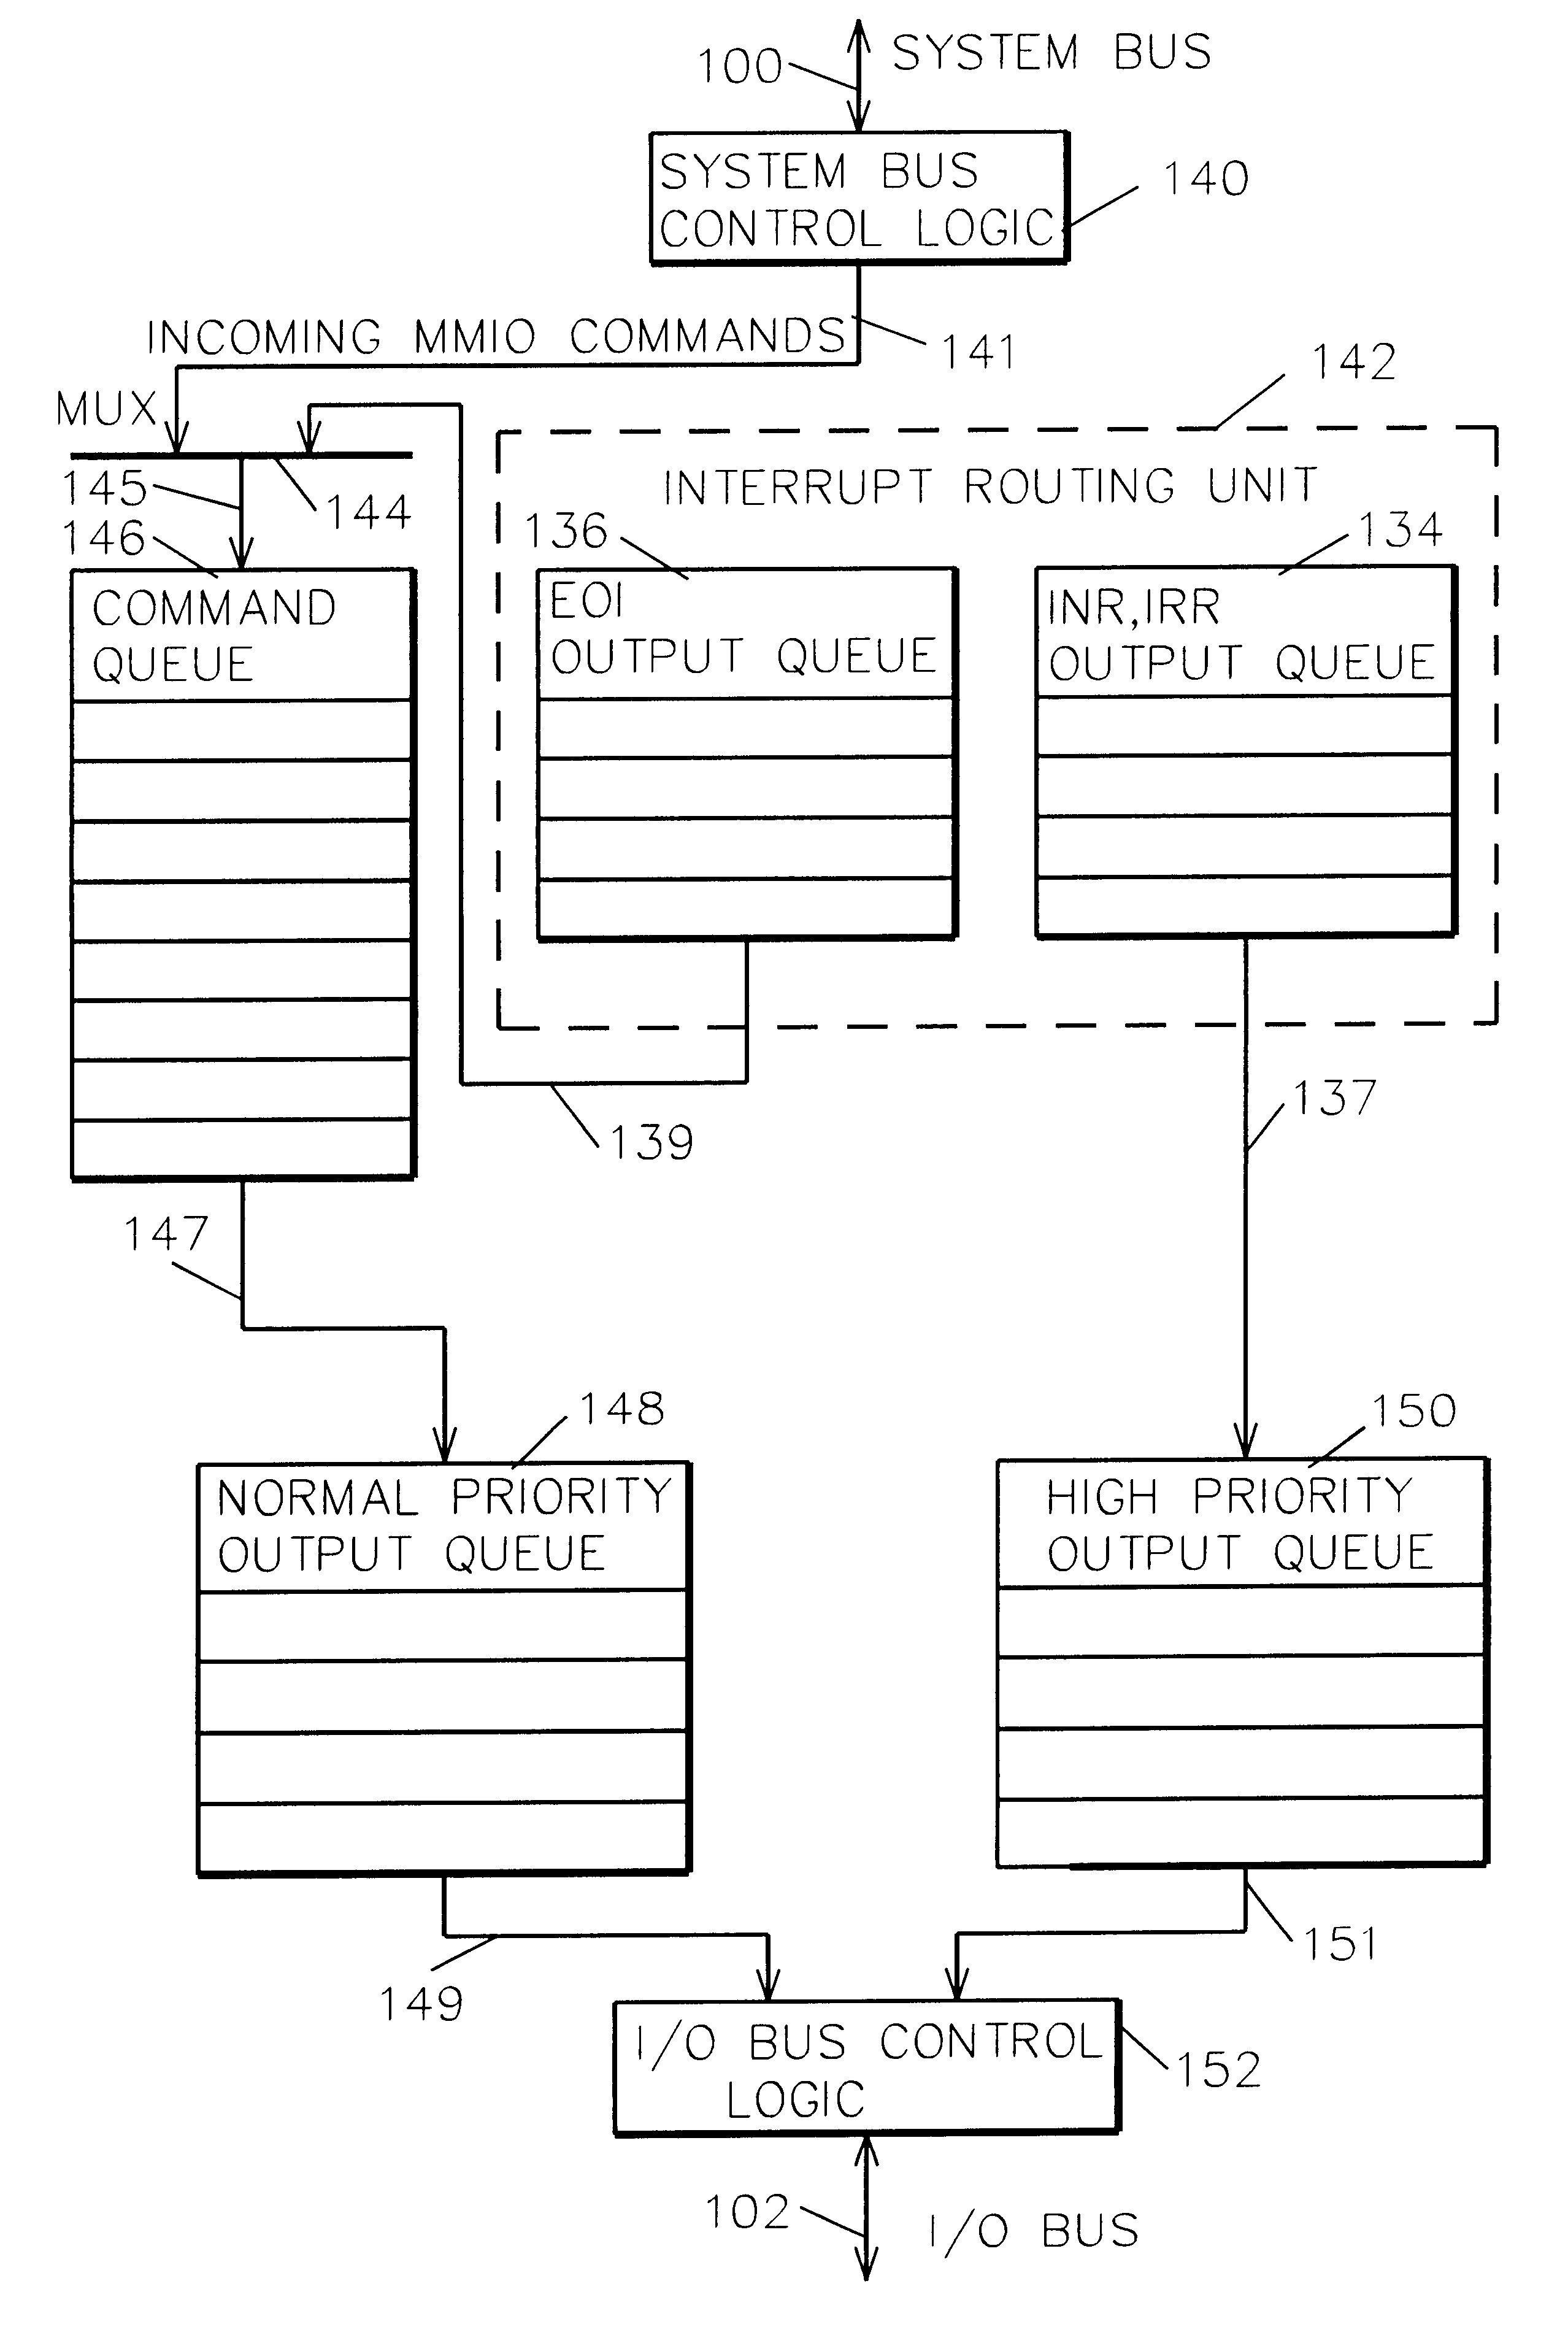 System and method for loading commands to a bus, directly loading selective commands while queuing and strictly ordering other commands